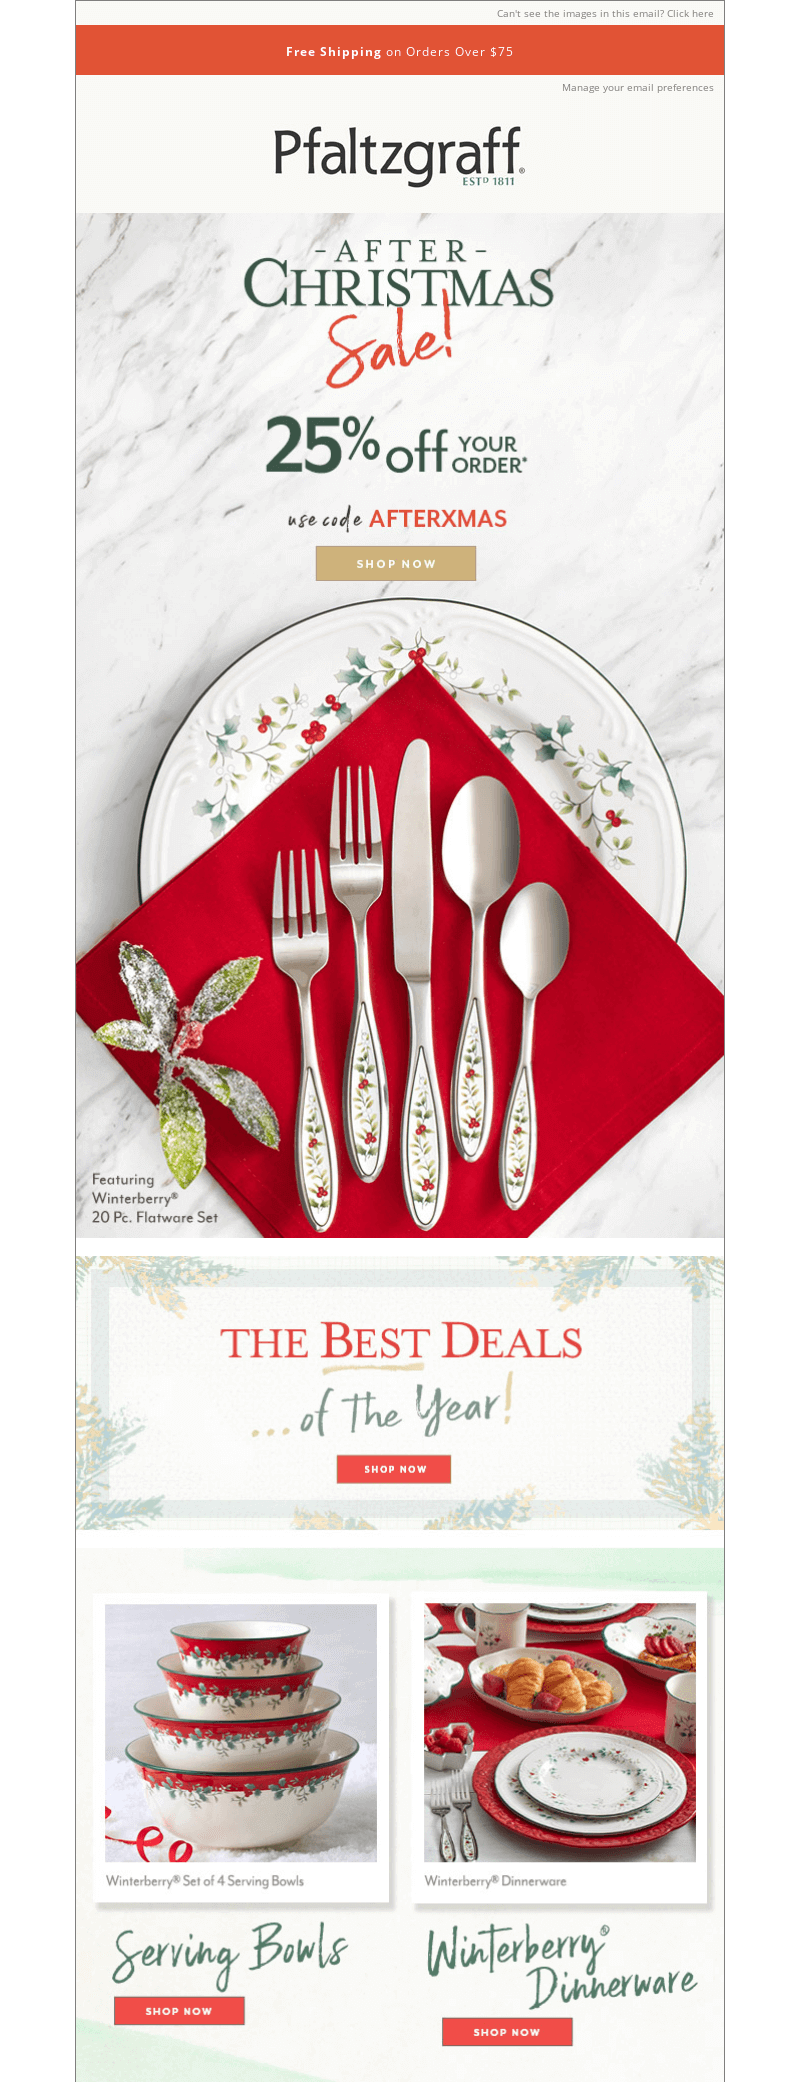 An email promoting festive dinnerware with photographs of the products along with red napkins.